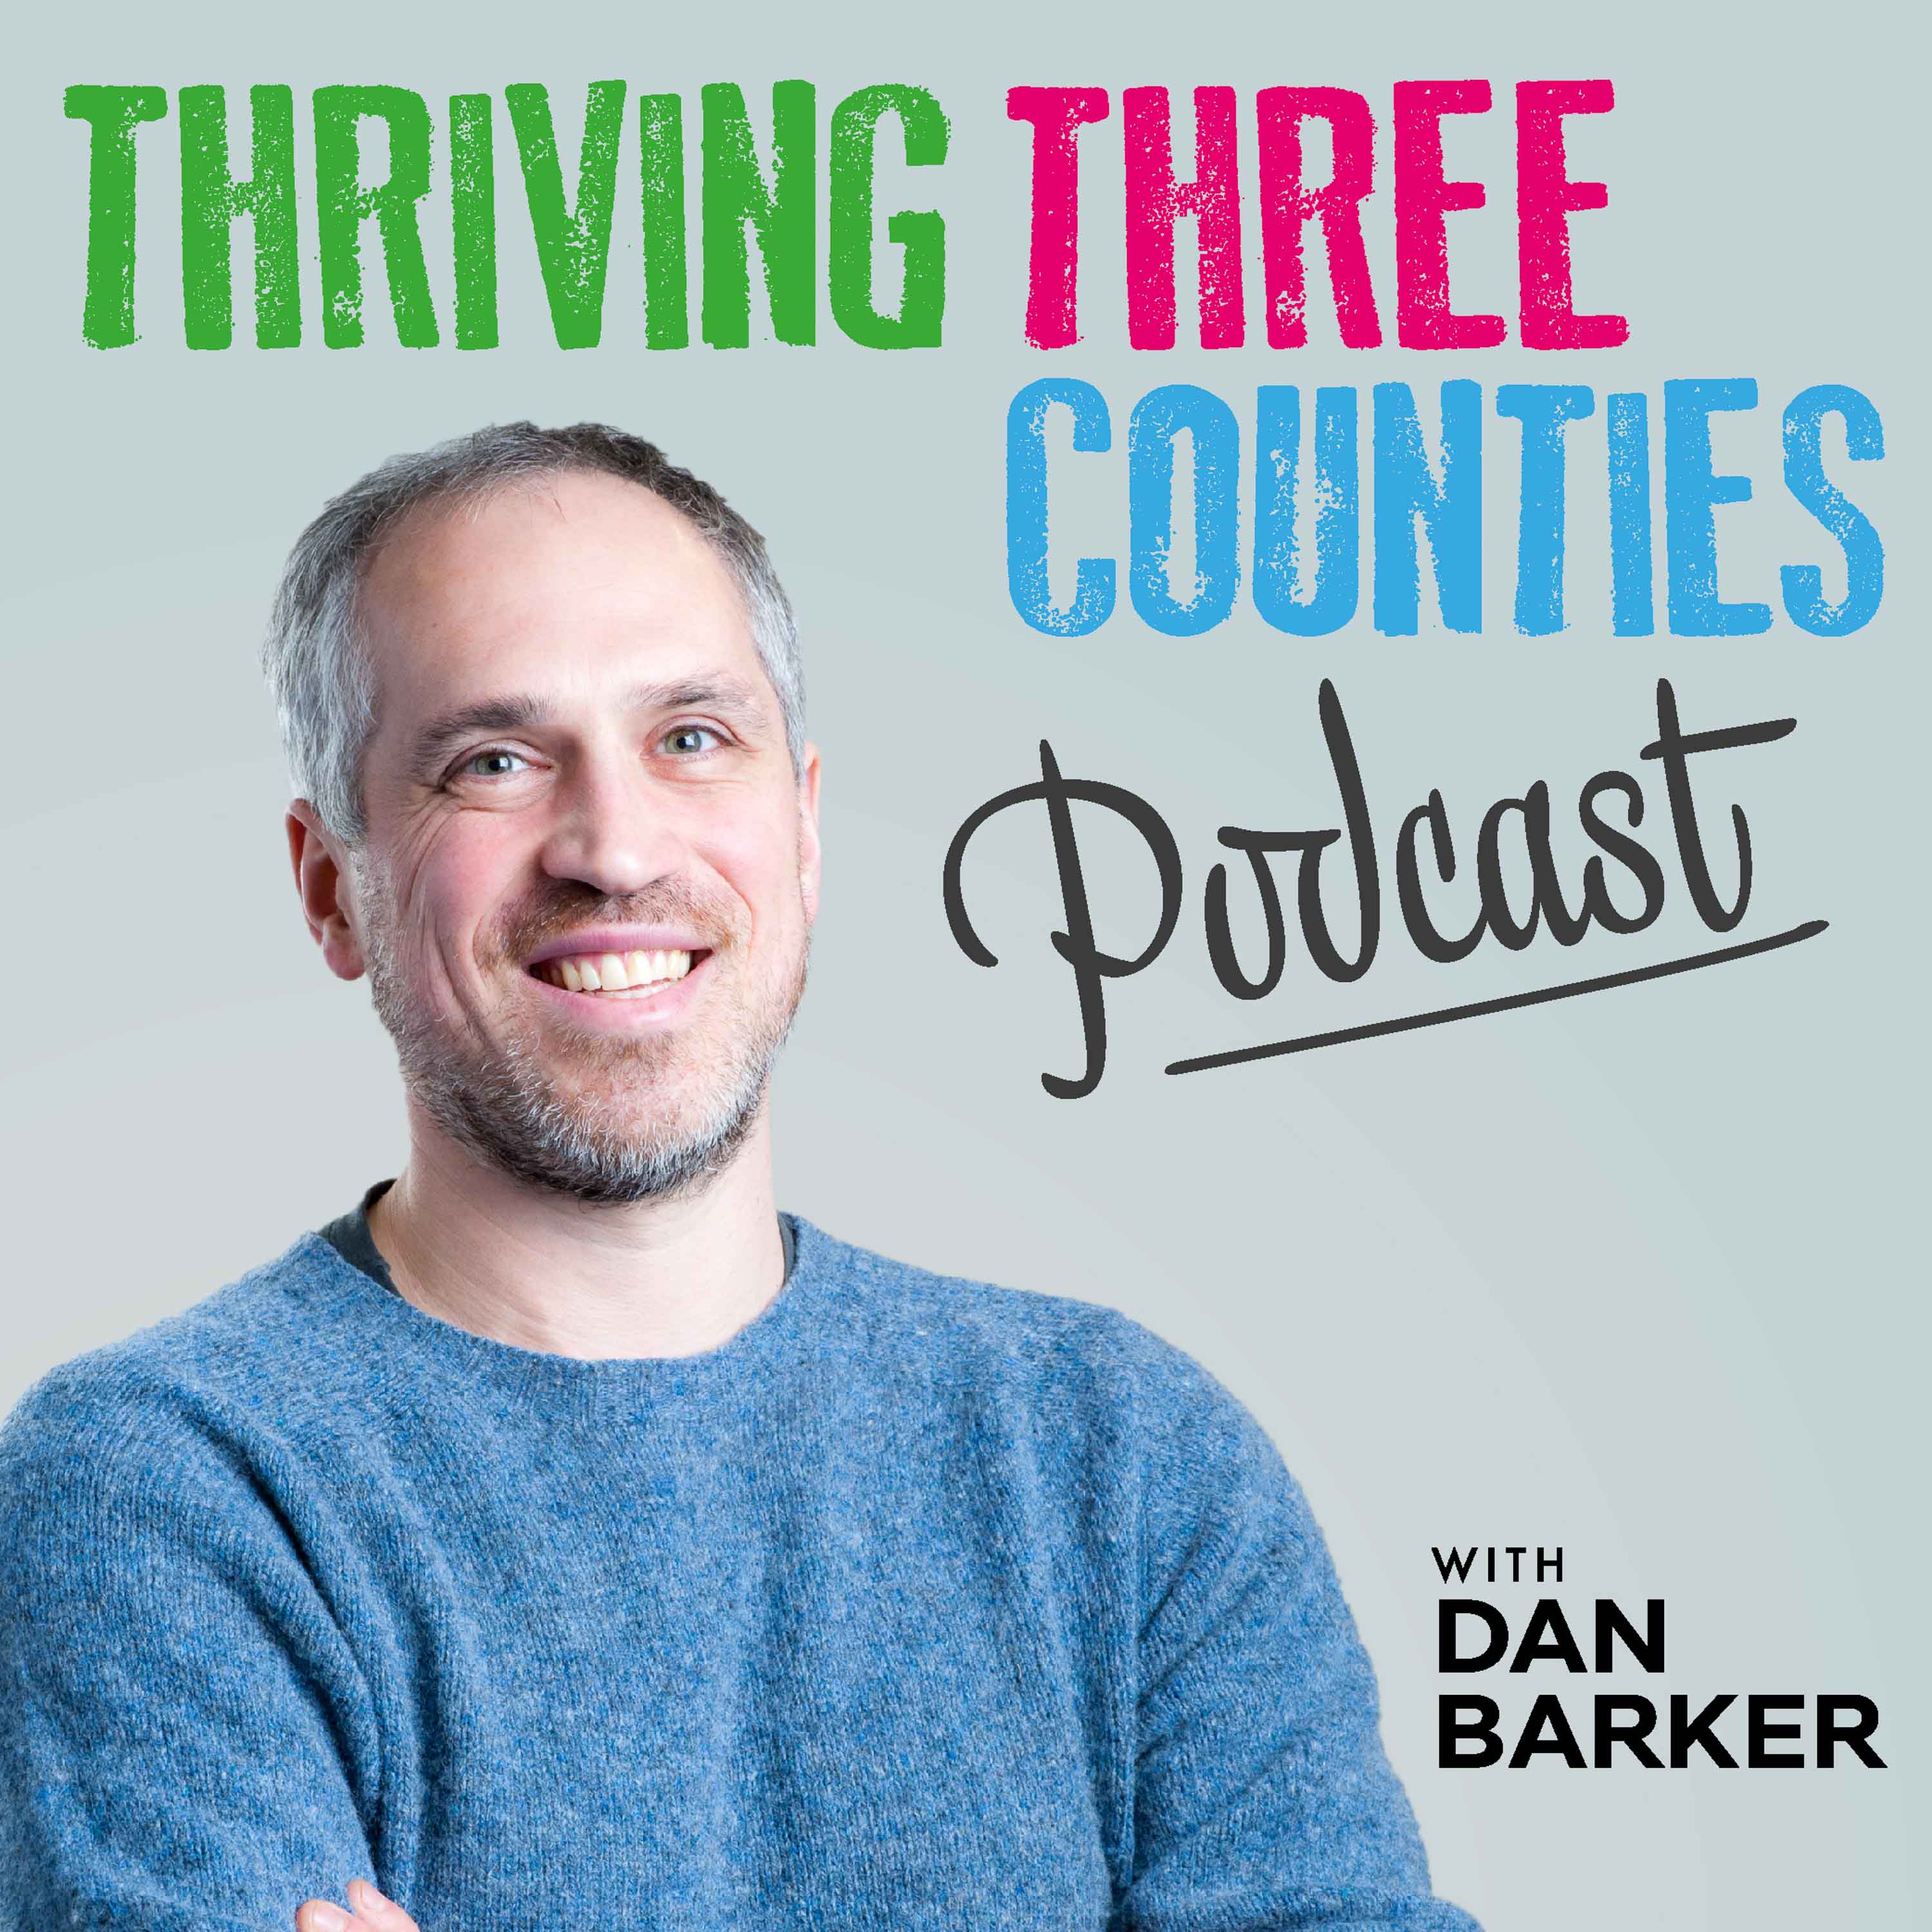 Artwork for podcast Thriving Three Counties